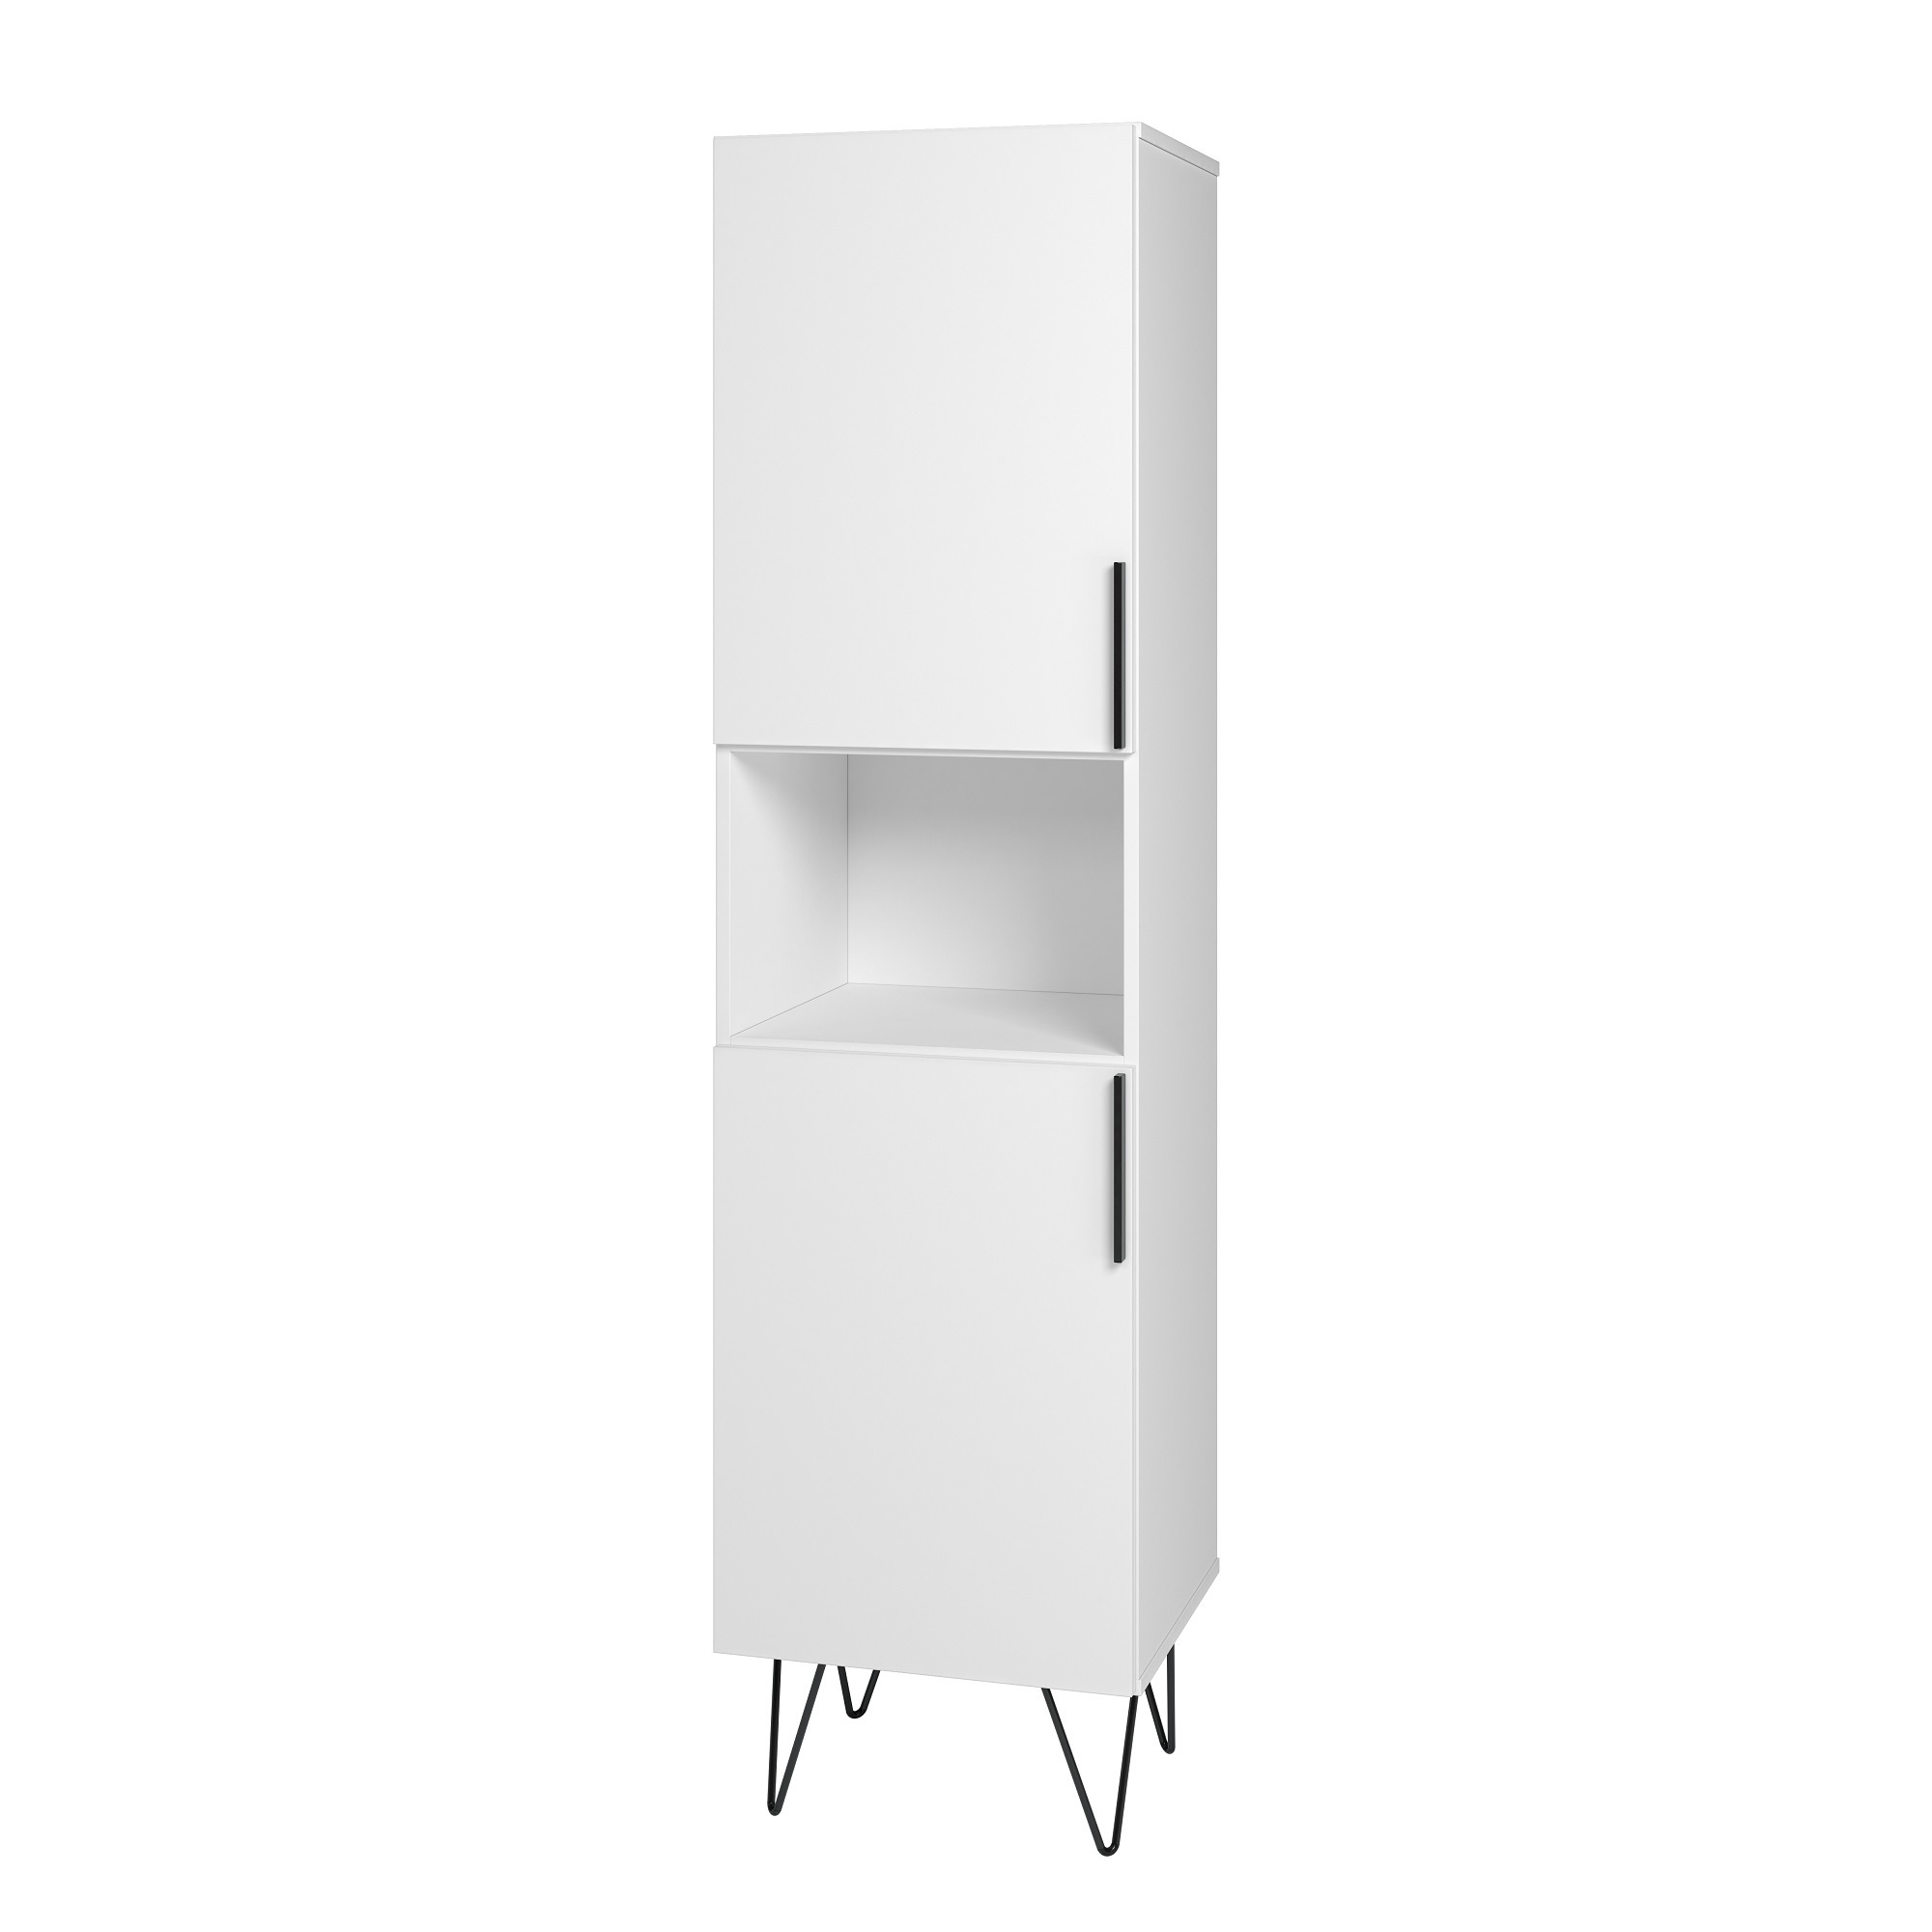 Manhattan Comfort, Beekman 17.51 Narrow Bookcase in White, Height 67.32 in, Shelves (qty.) 5 Material MDPE, Model 404AMC